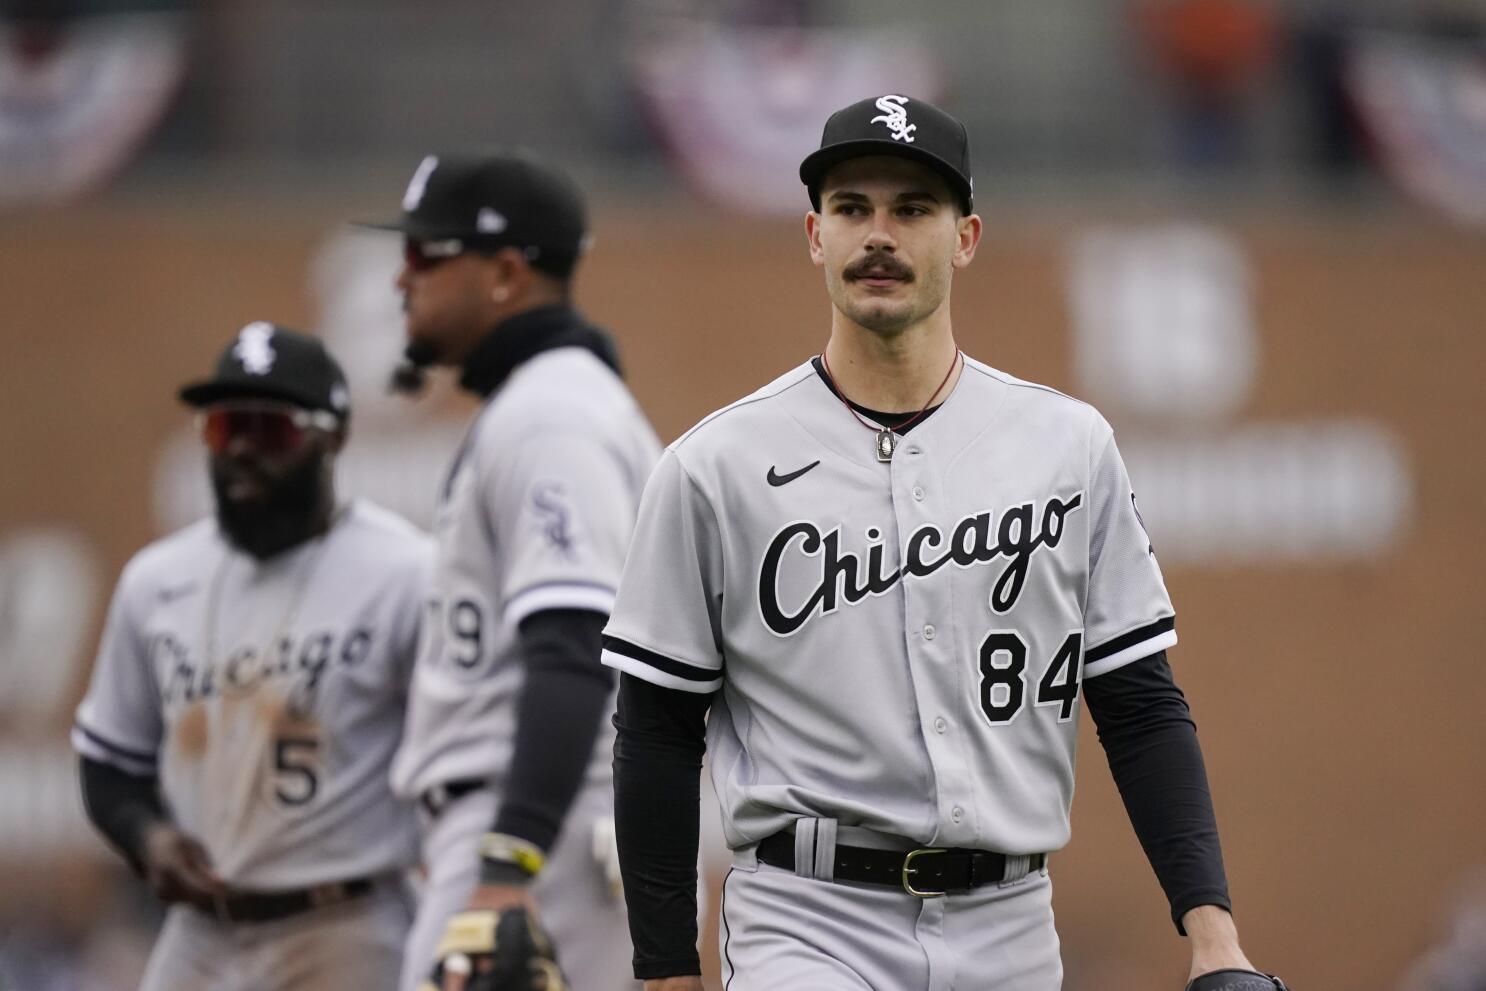 Cease remains unbeaten against Tigers as White Sox romp